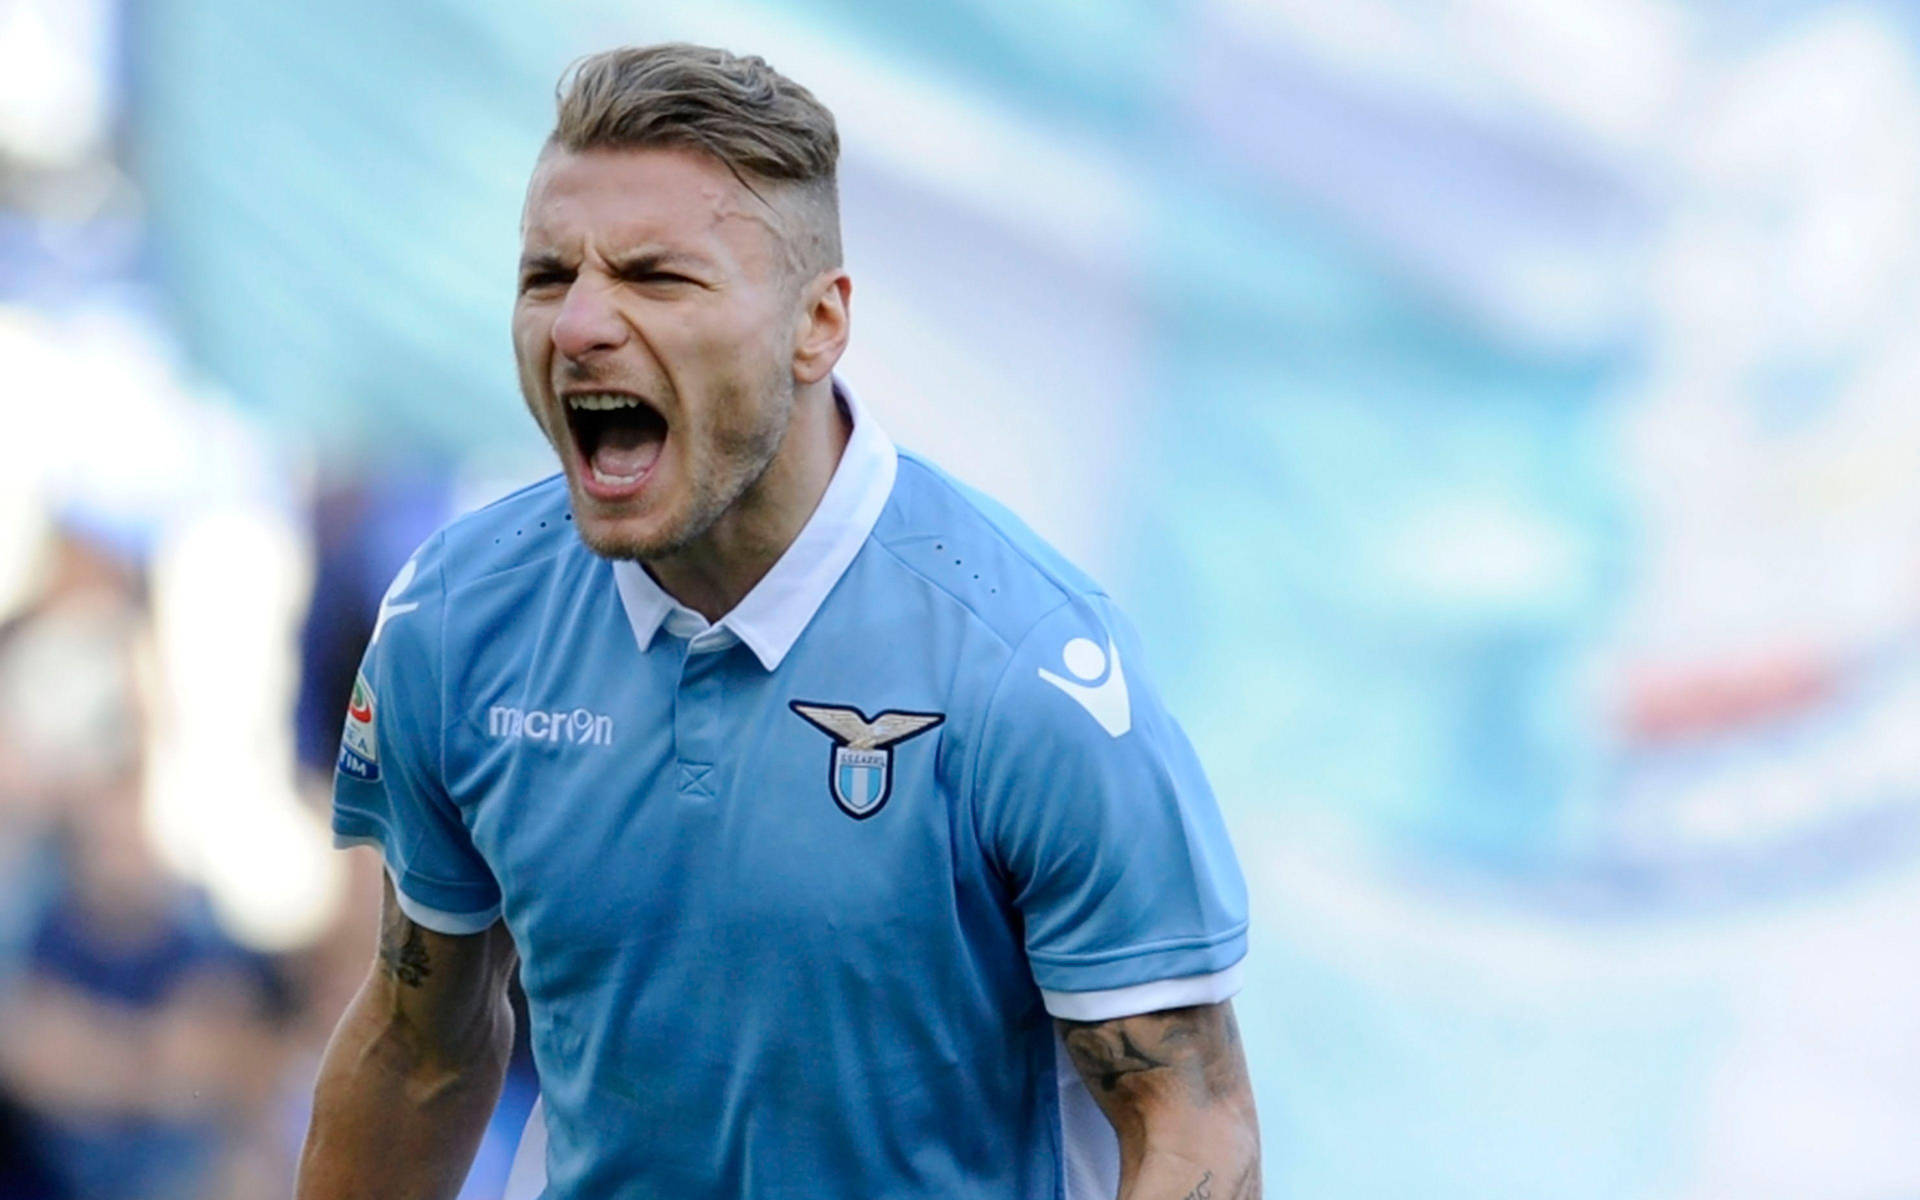 Ciro Immobile In Action: Scoring Goals With Finesse Wallpaper